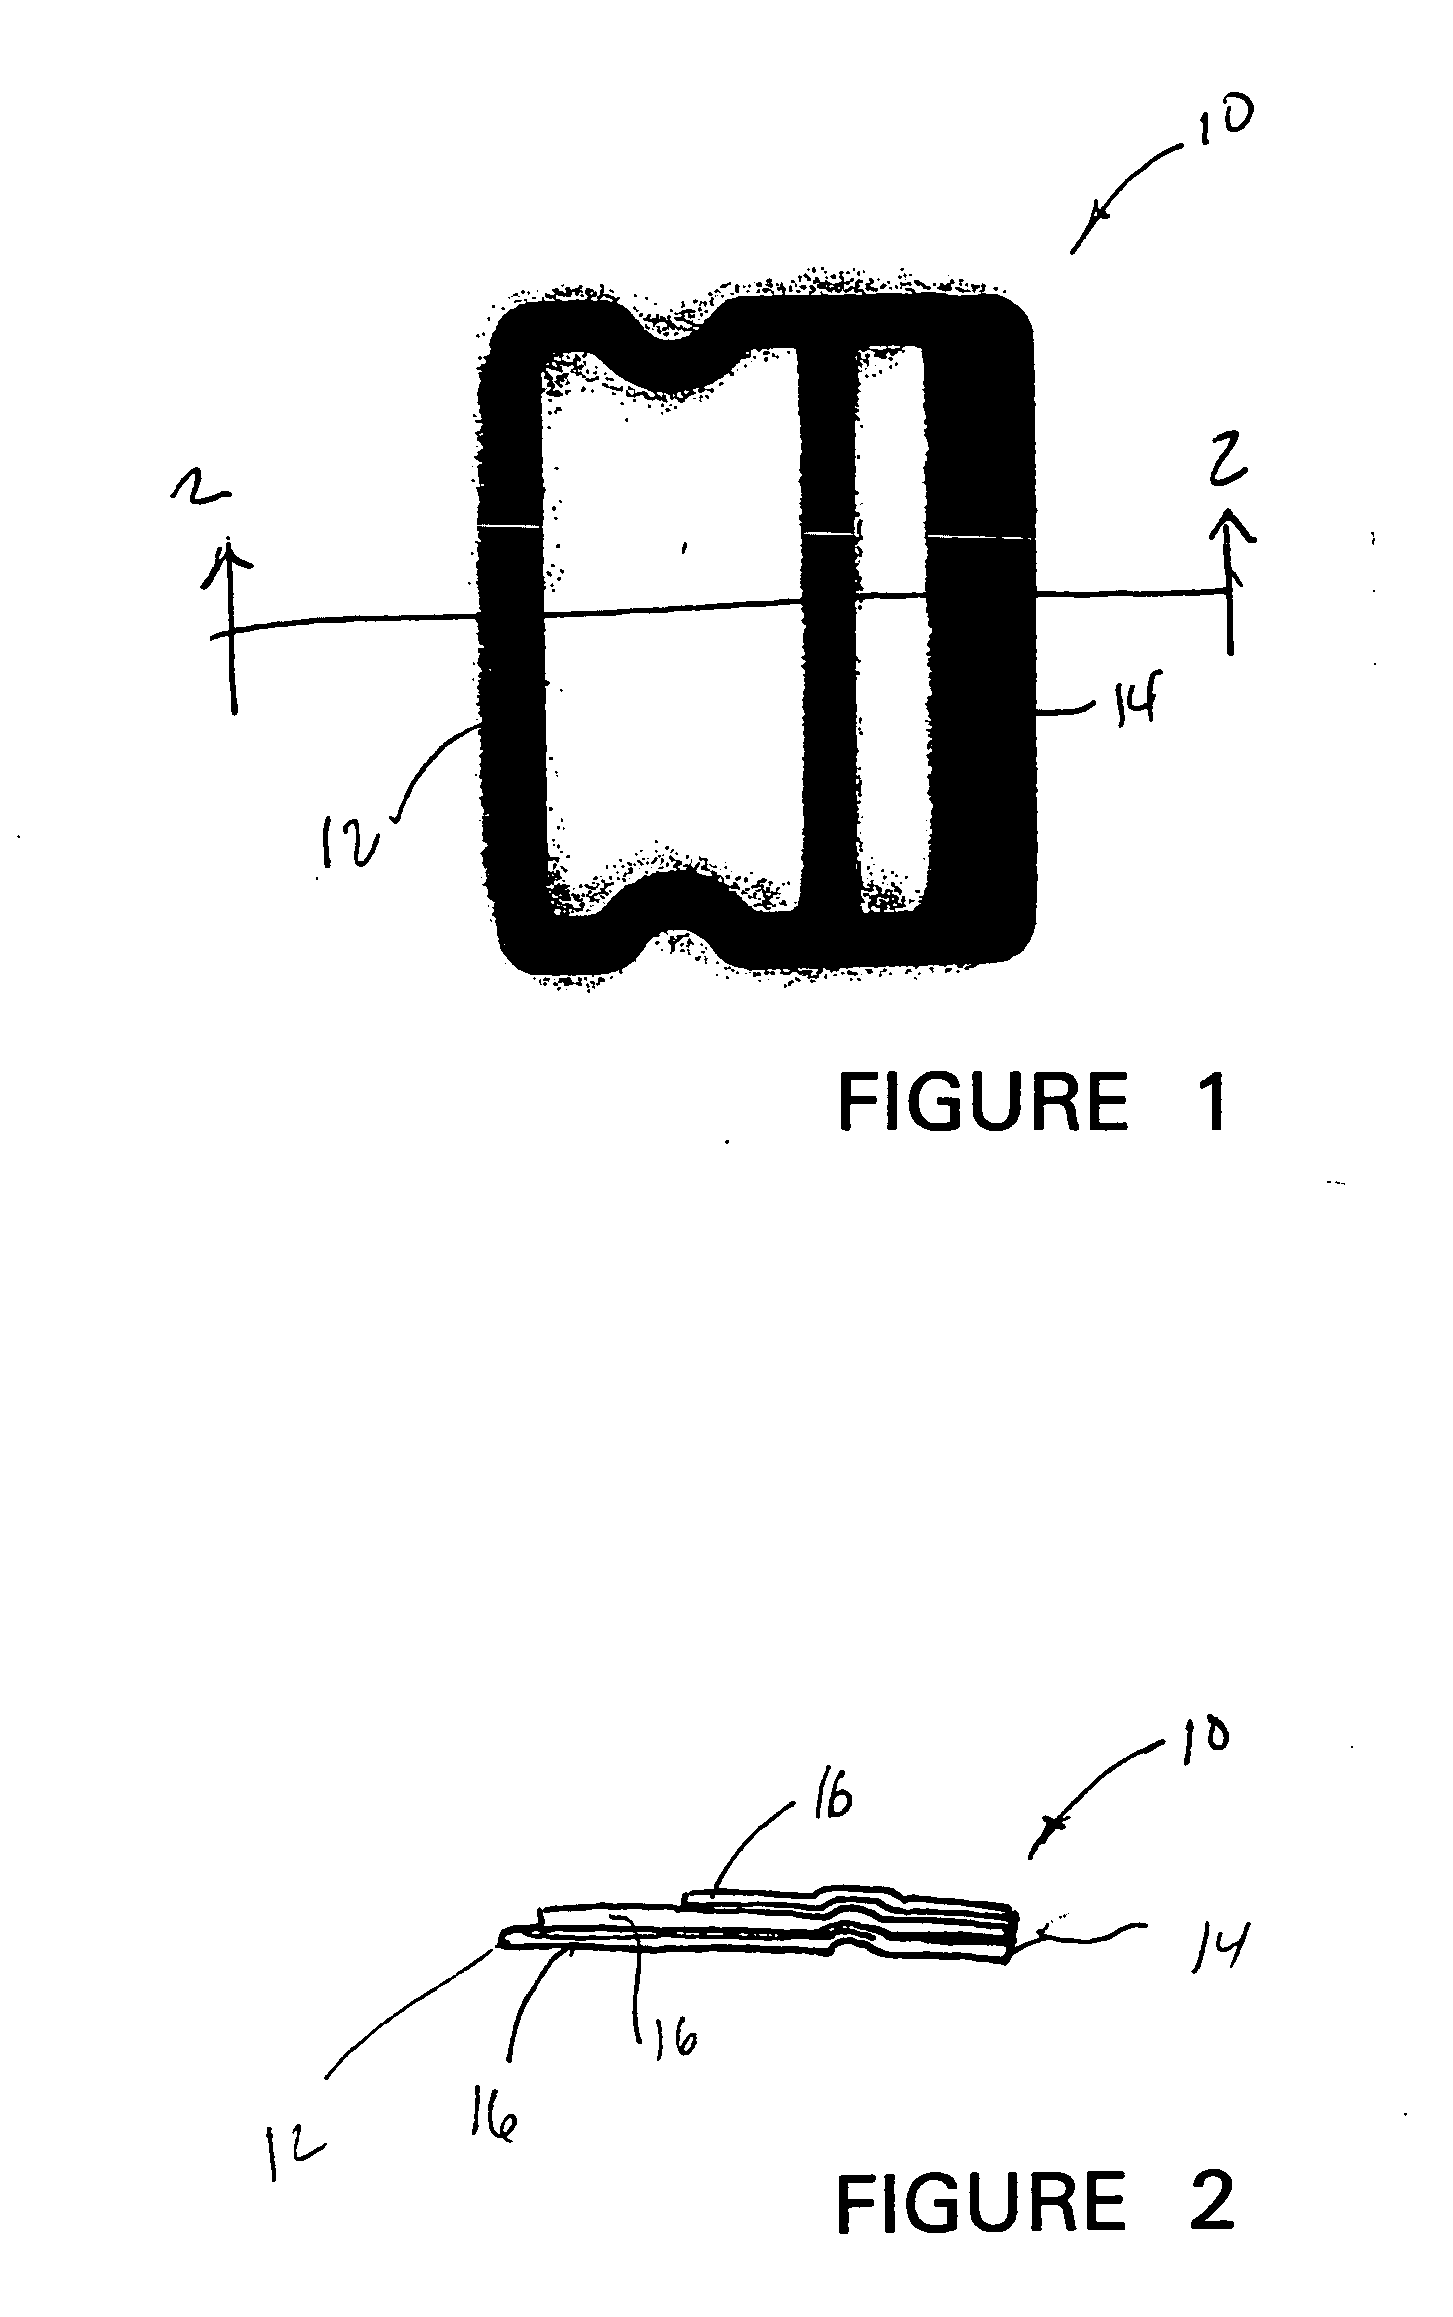 Deformable restraint guide for use with child restraint system